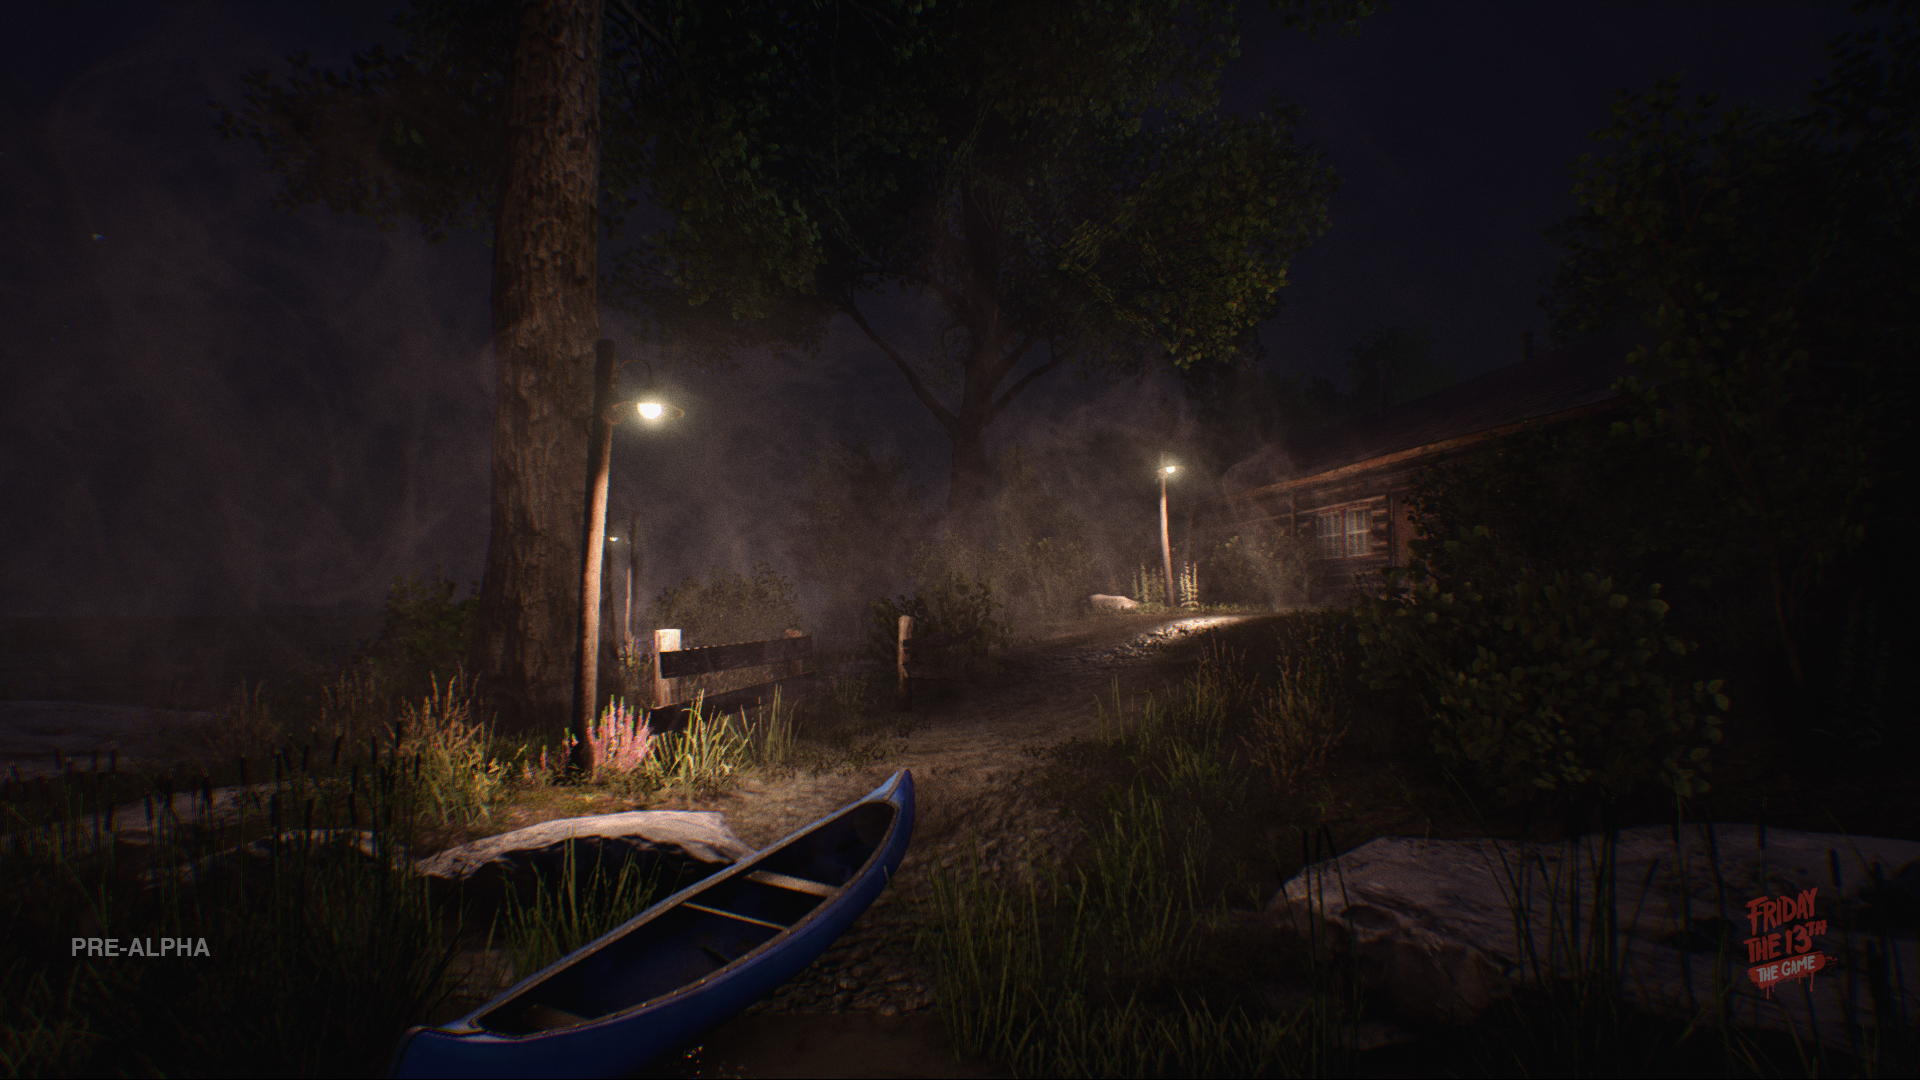 Friday The 13th: The Game #15